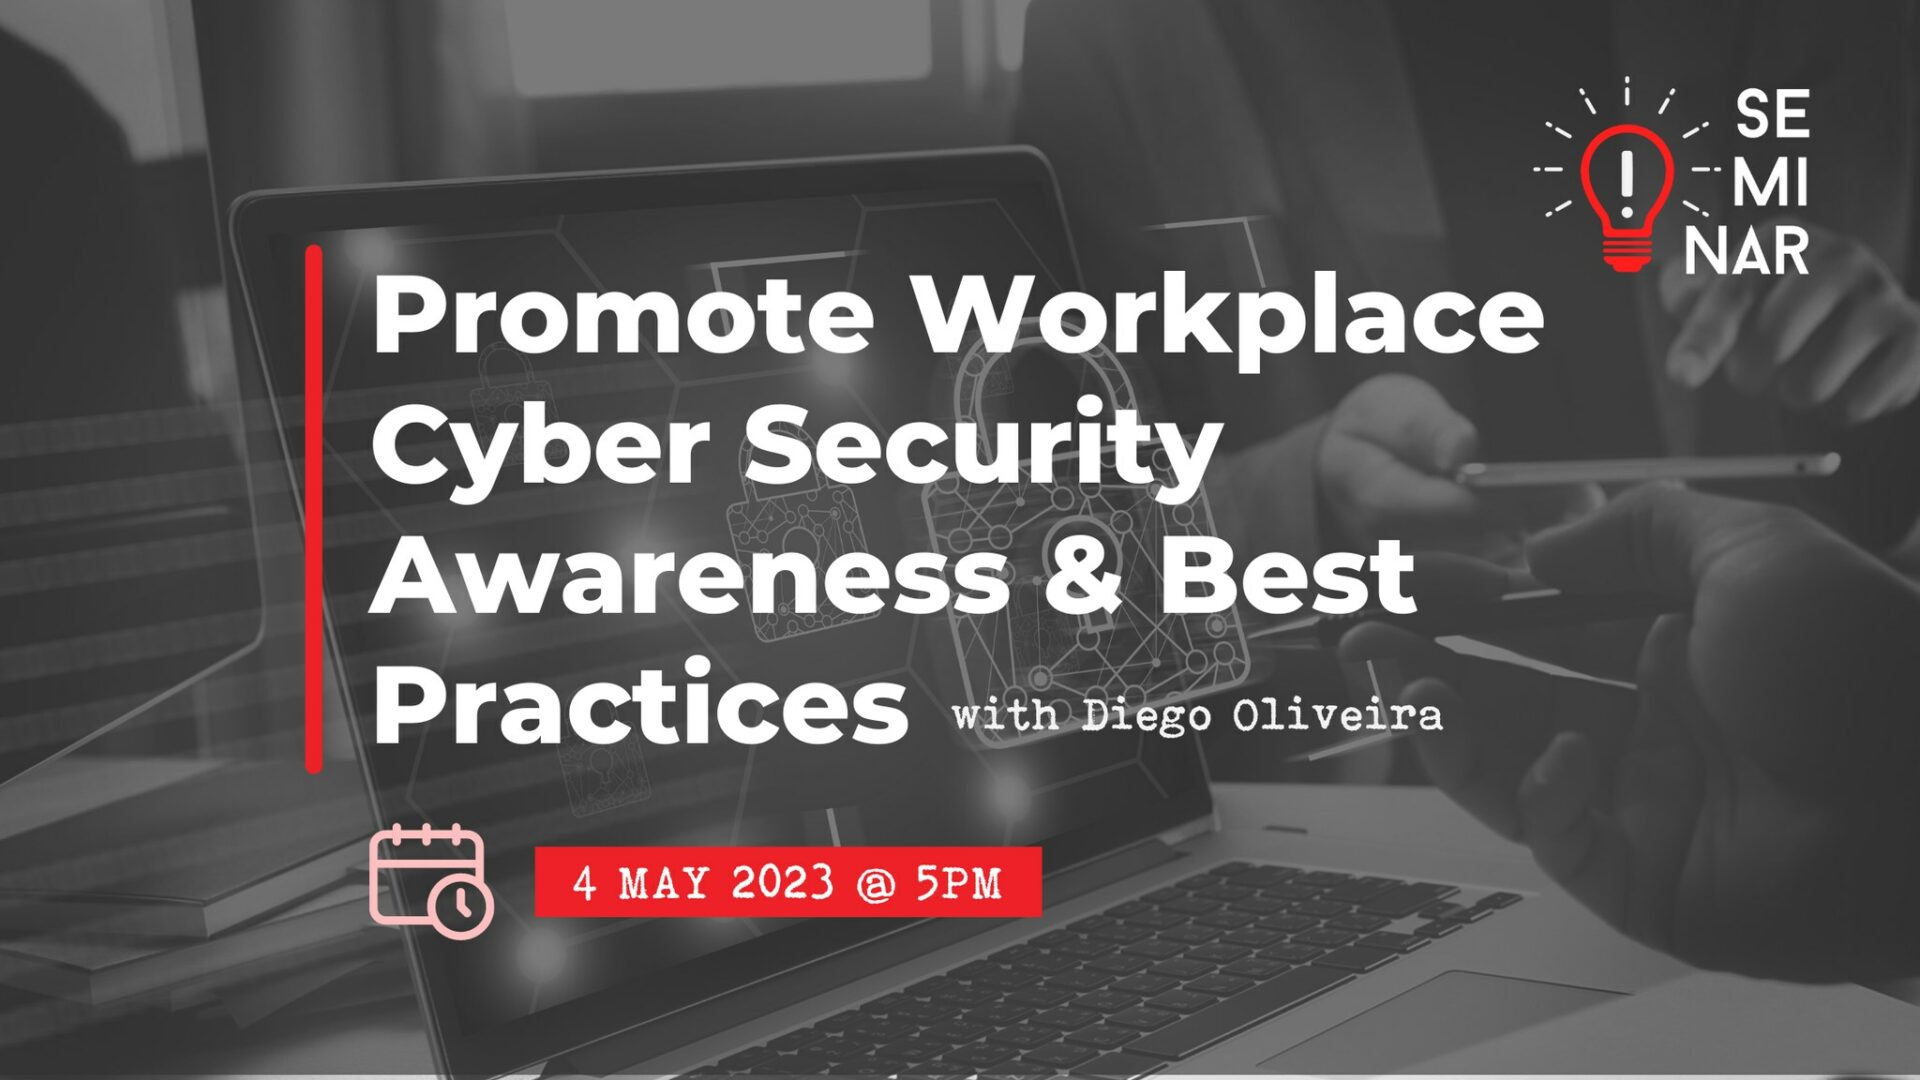 Seminar, May 4: Promote Workplace Cyber Security Awareness & Best Practices